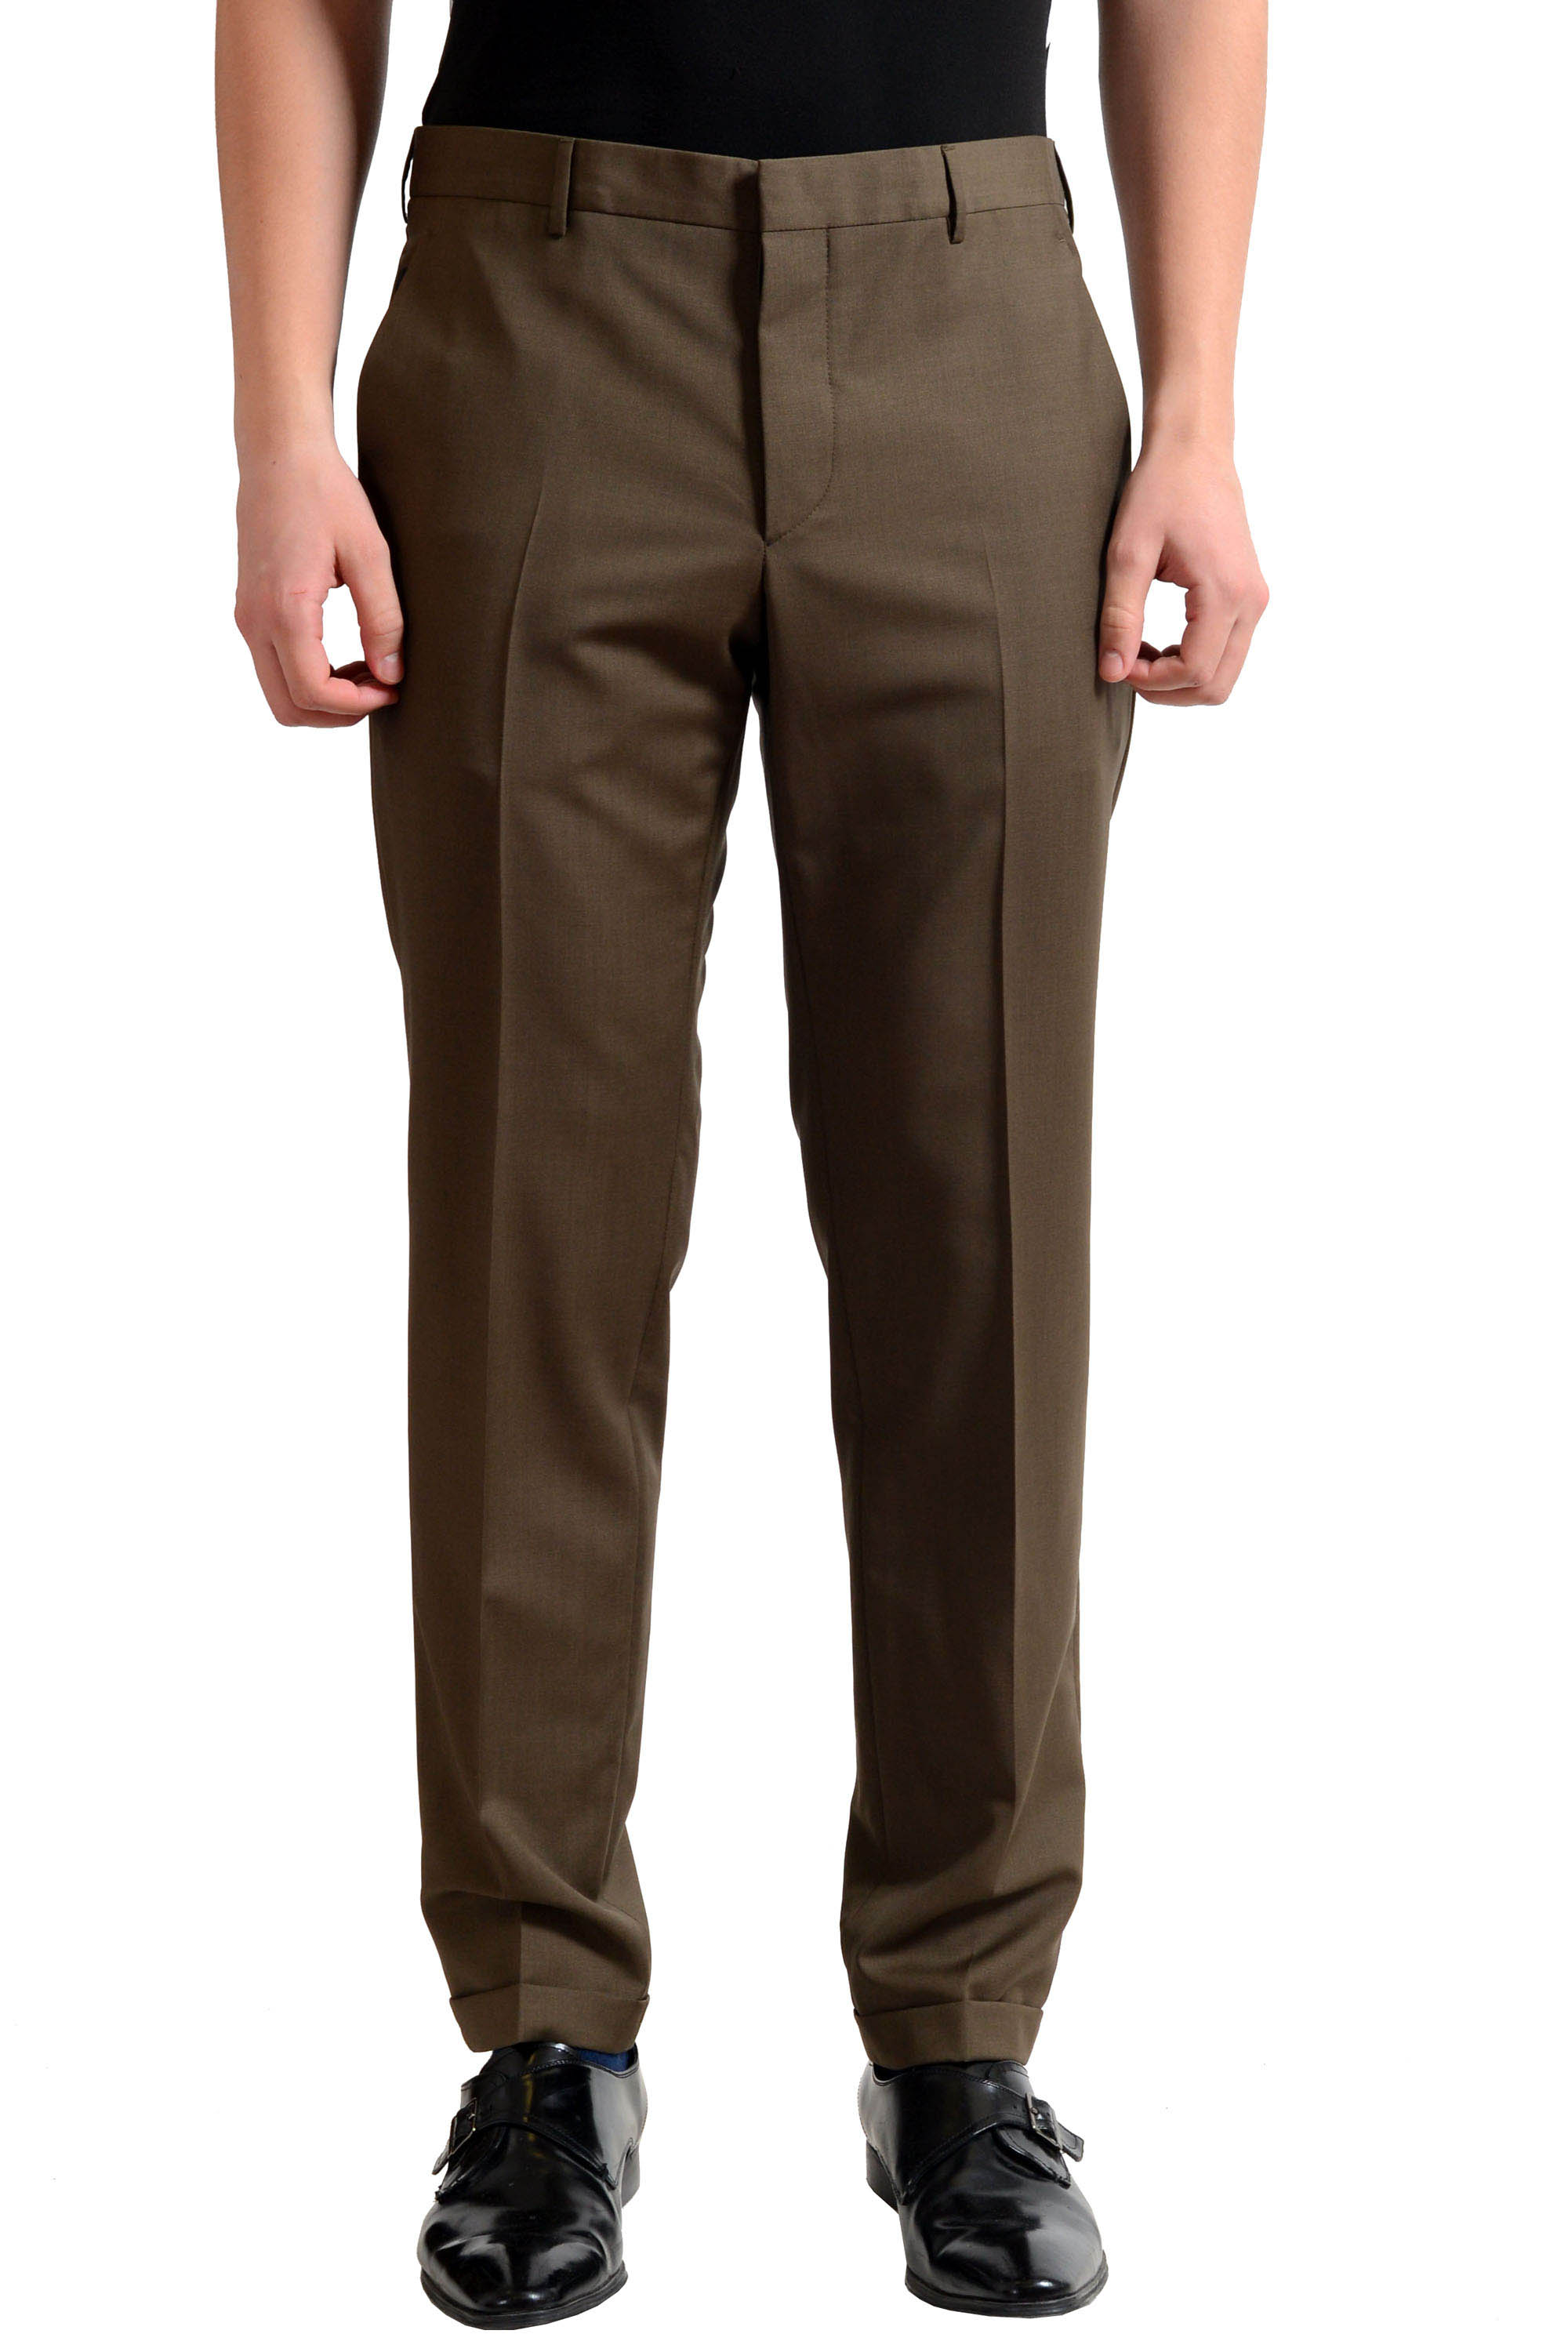 Dark Brown Slim Fit Pants for Men by GentWith.com | Worldwide Shipping